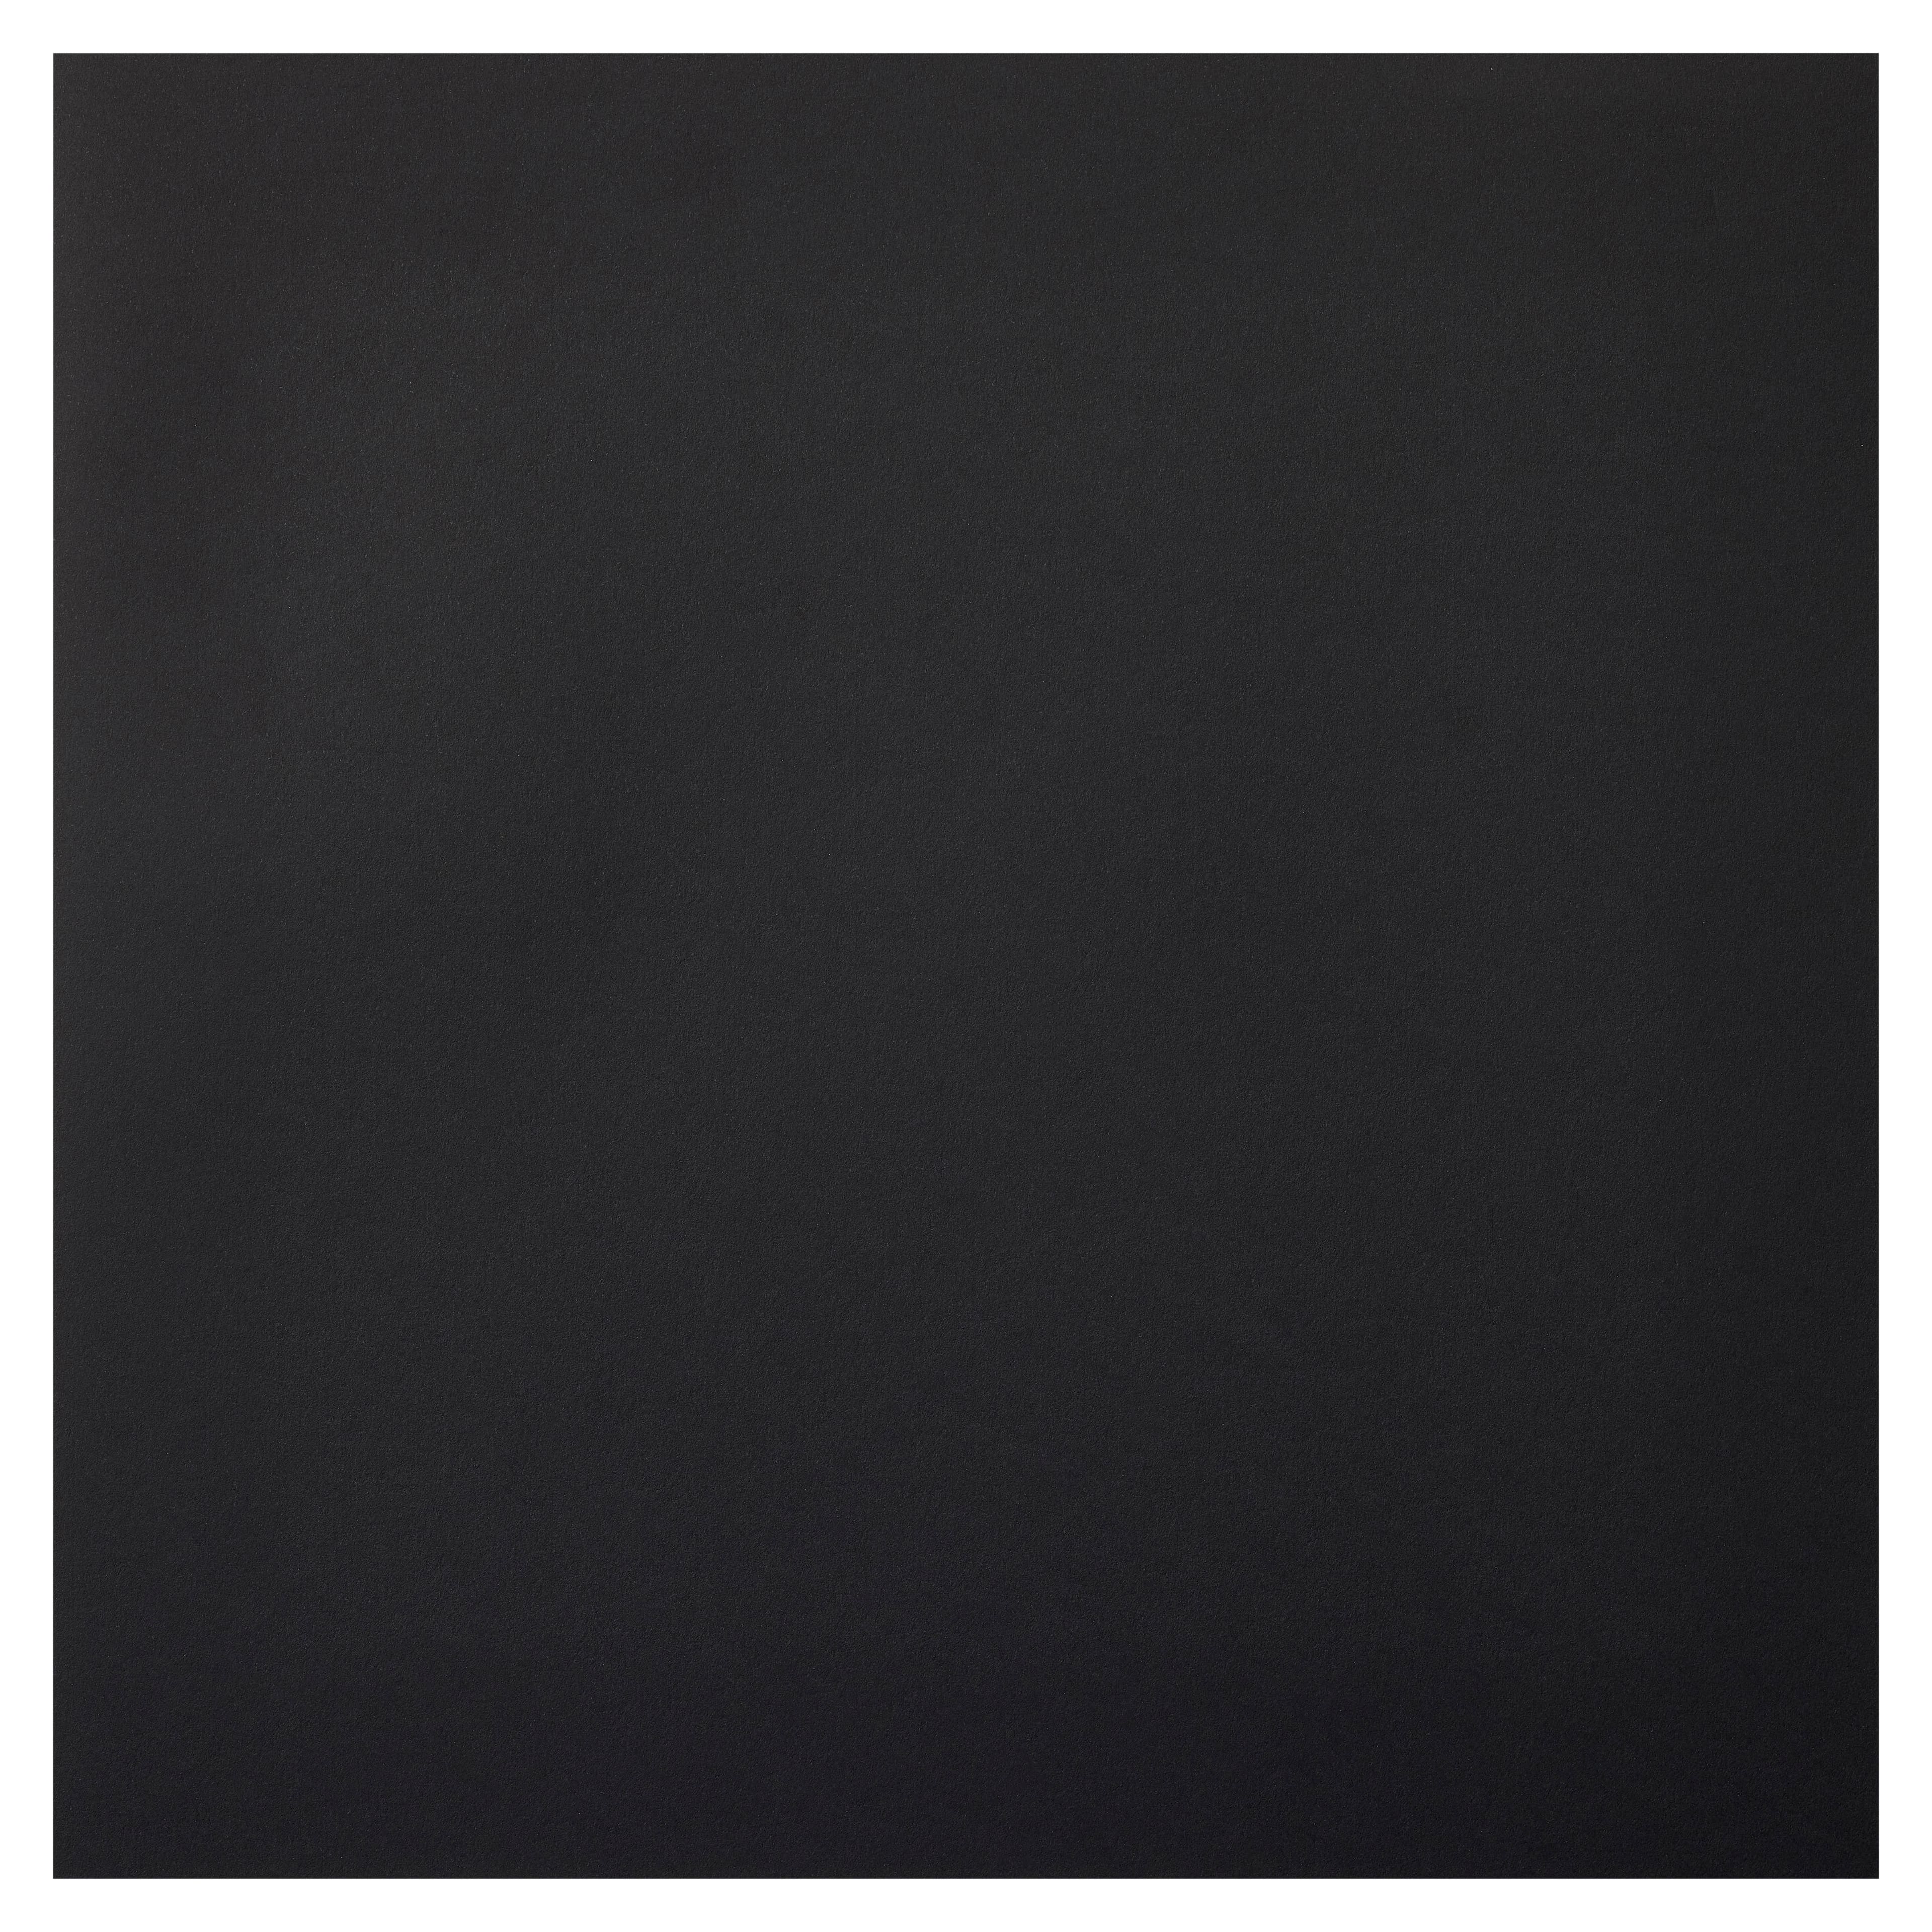  50 Sheets Black Cardstock 12 x 12, 230gsm/80lb Thick Paper  Black Cardstock Paper Construction Paper for Invitations, Halloween Crafts,  Christmas Gift Card Making, Scrapbook Supplies, Stocking Stuffers : Arts,  Crafts & Sewing